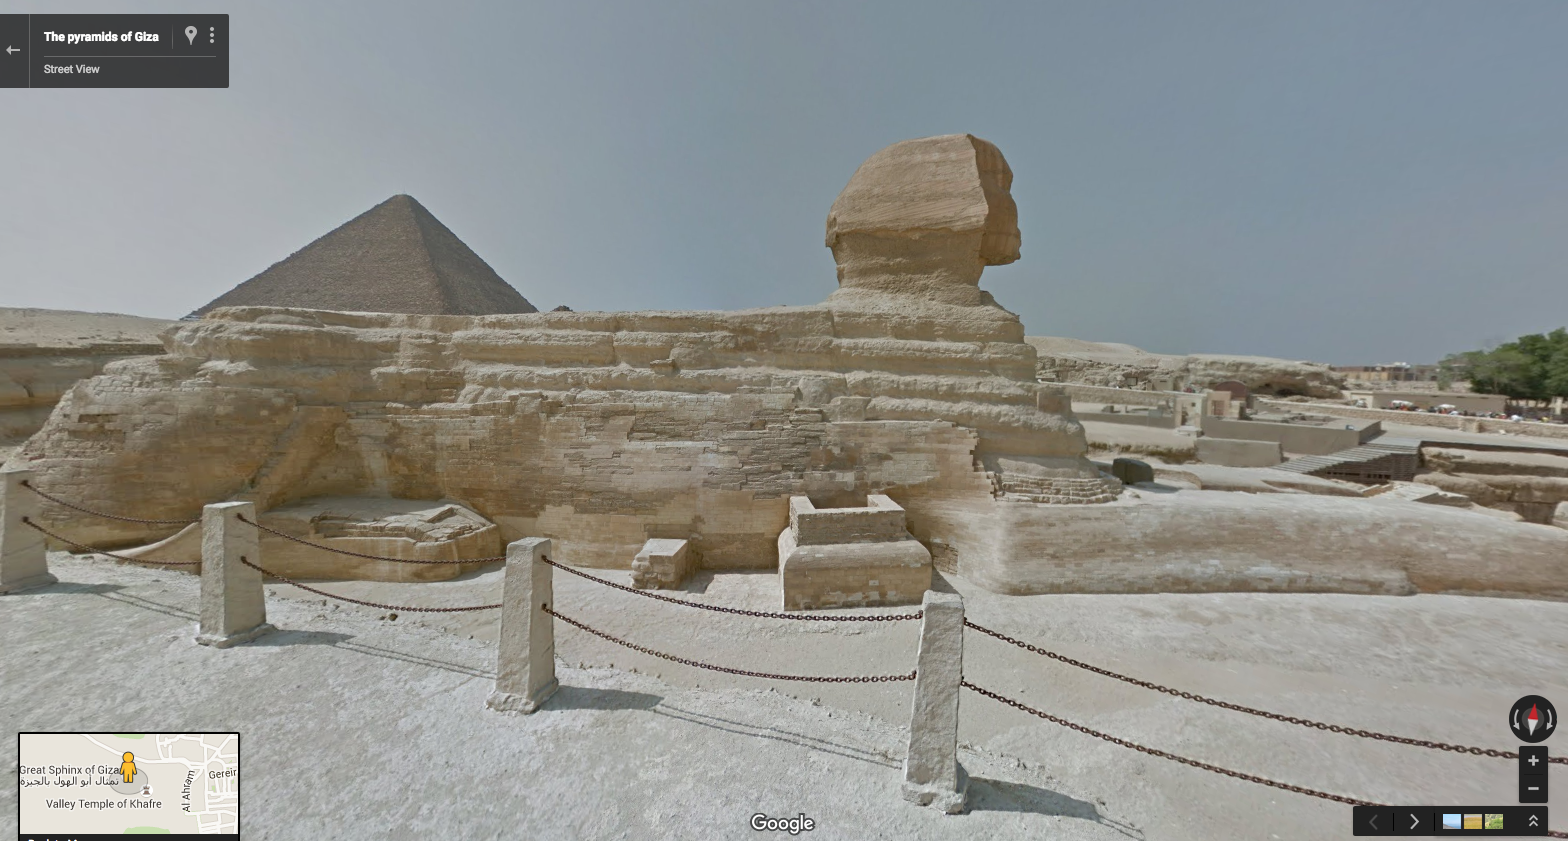 Google Maps Published Street View Photos Of The Roads Surrounding Egypts Great Pyramids Of Giza In 2014 If You Cant Make It To Egypt Now You Can Walk Around The Historic Site Online  